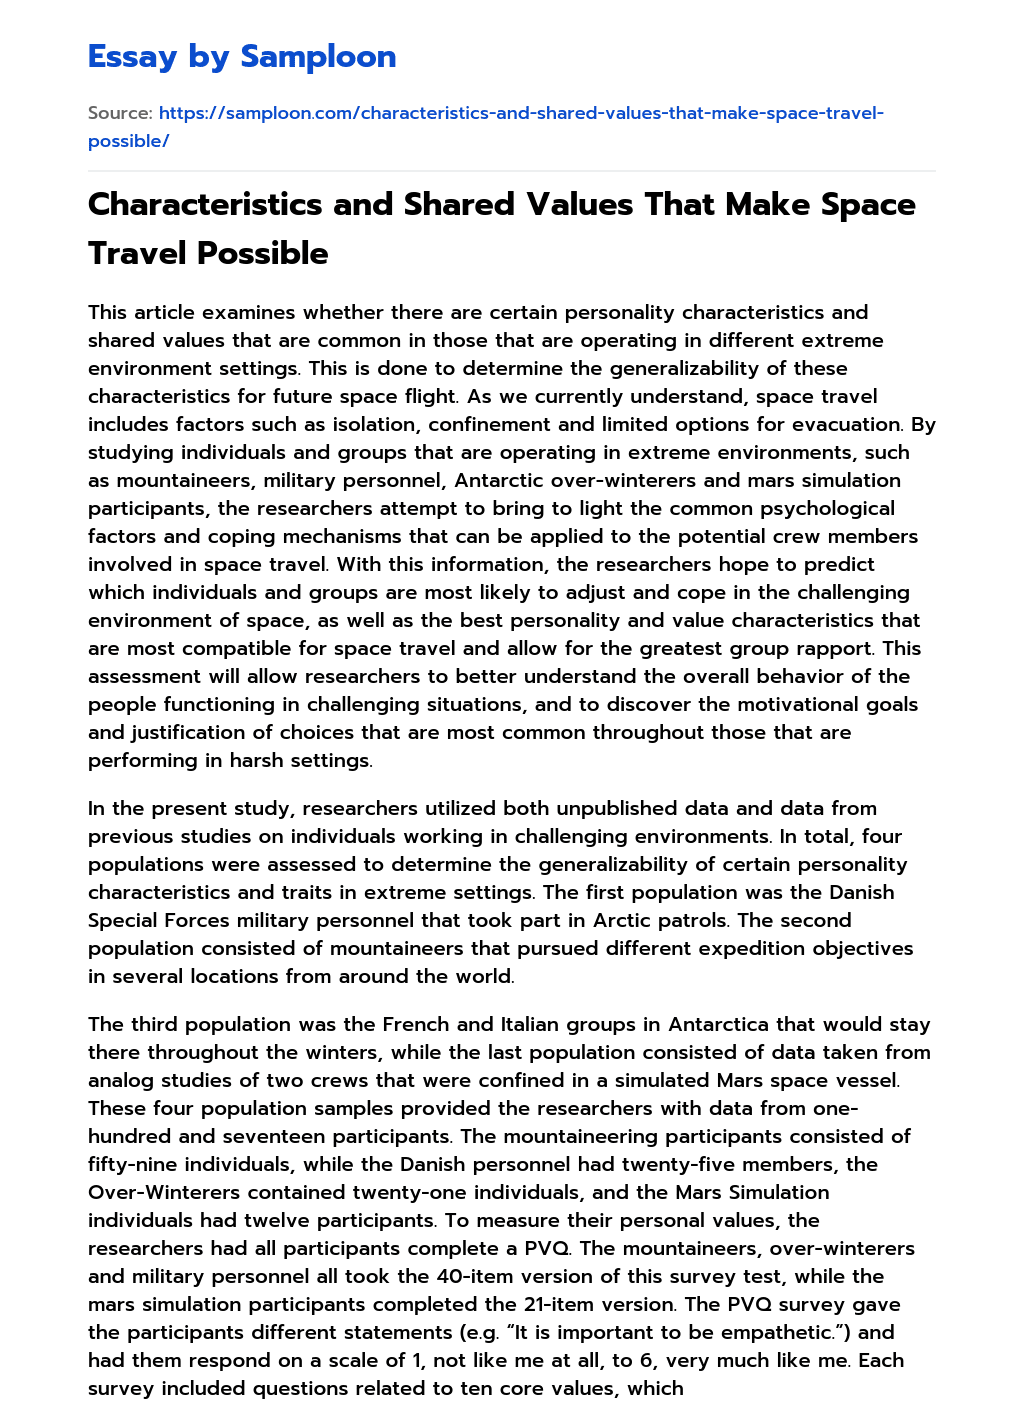 Characteristics and Shared Values That Make Space Travel Possible essay